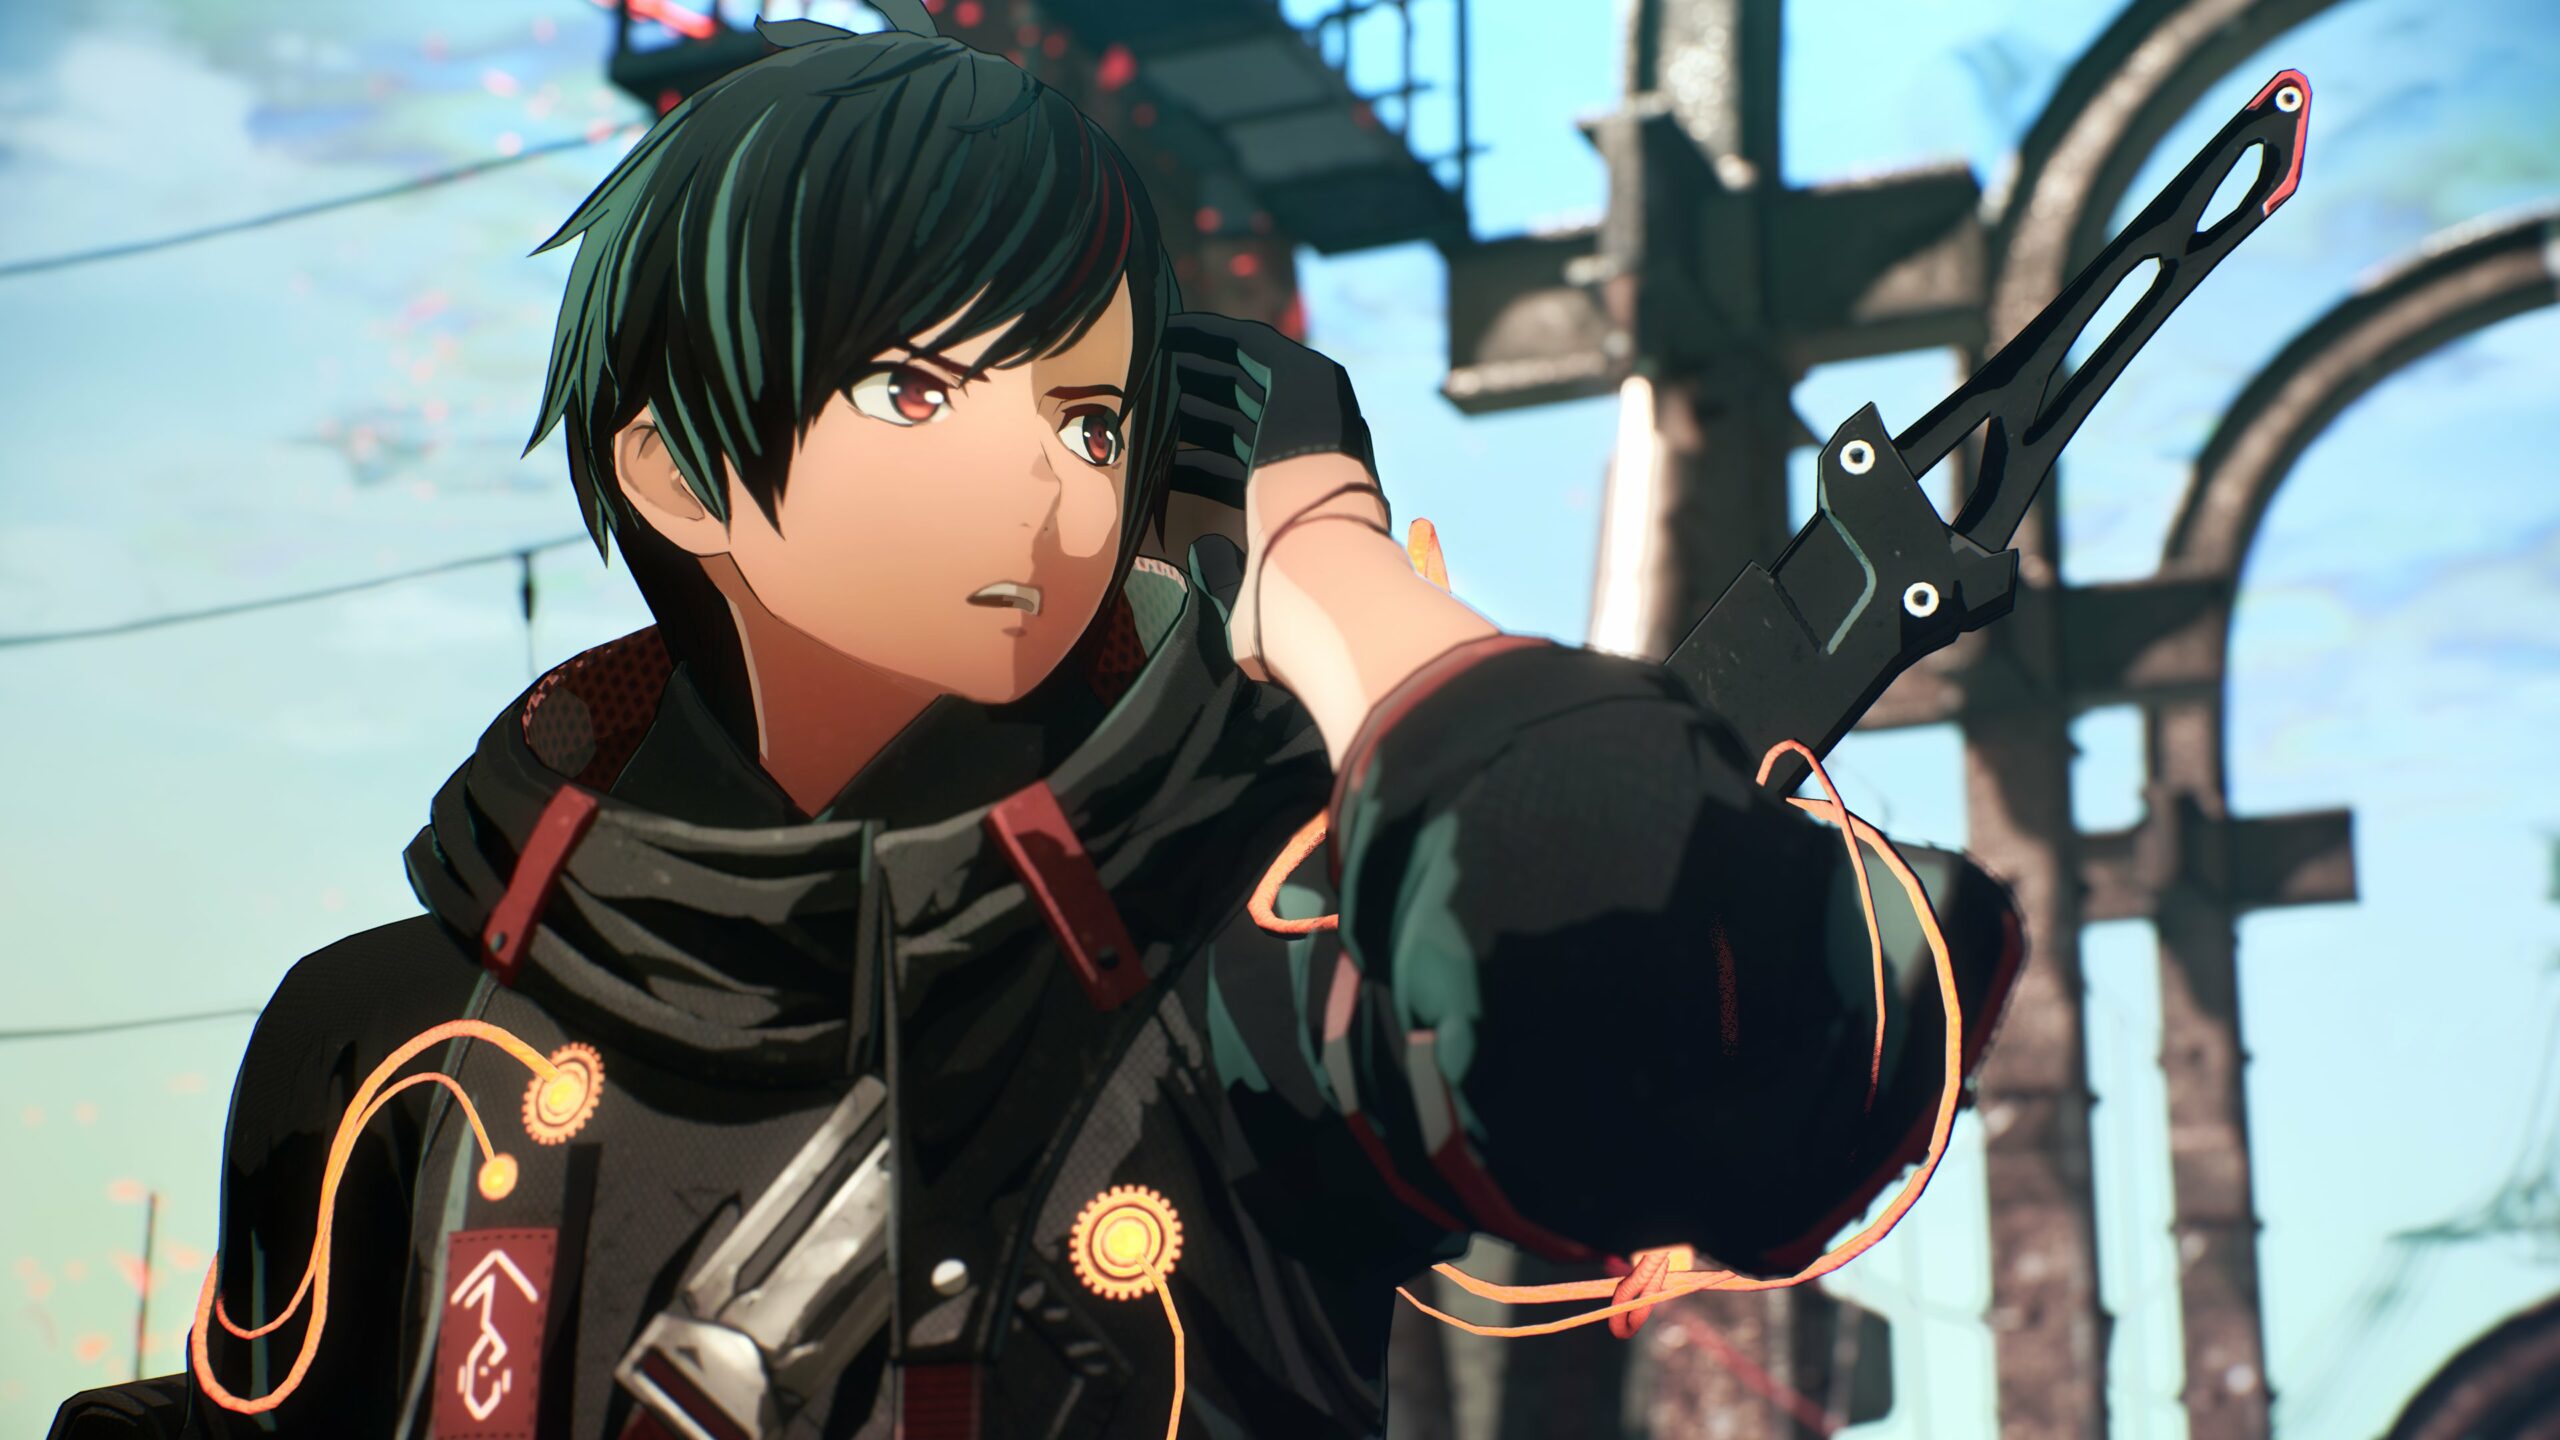 Big in 2020: Scarlet Nexus is worlds apart from the JRPGs of Bandai Namco's  past